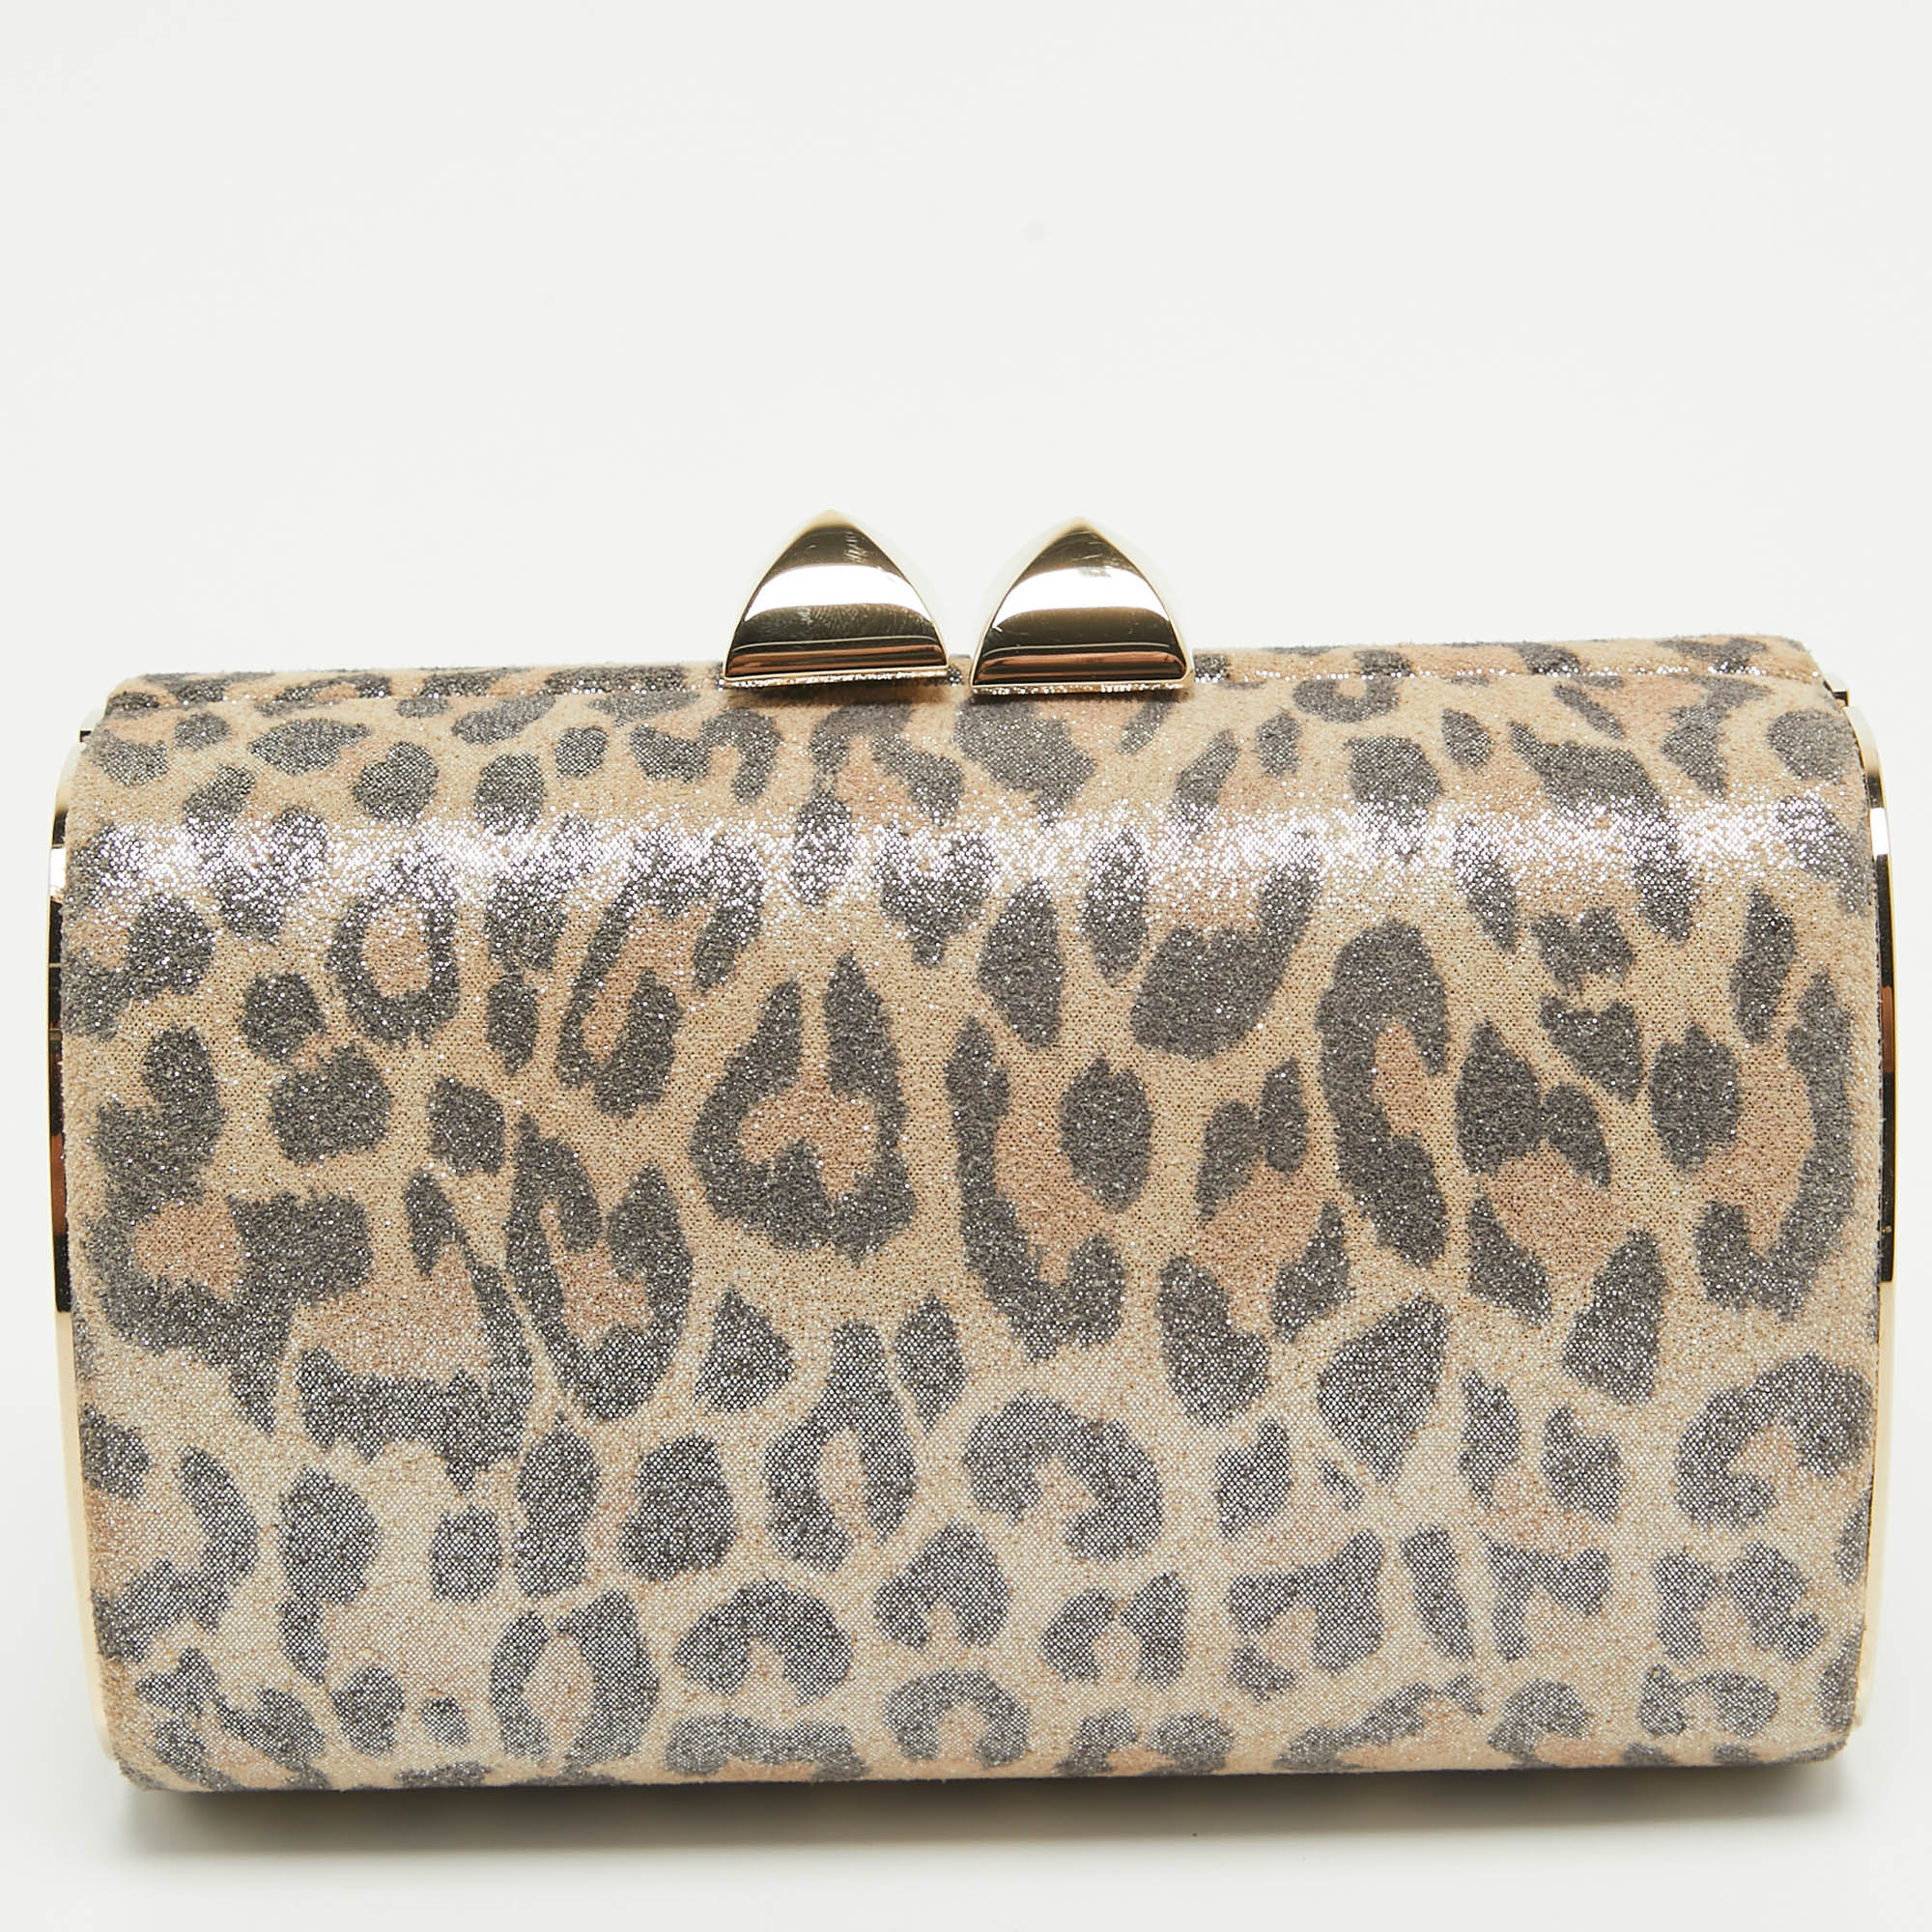 Pre-owned Jimmy Choo Light Beige Leopard Print Suede Compact Twill Tube Clutch